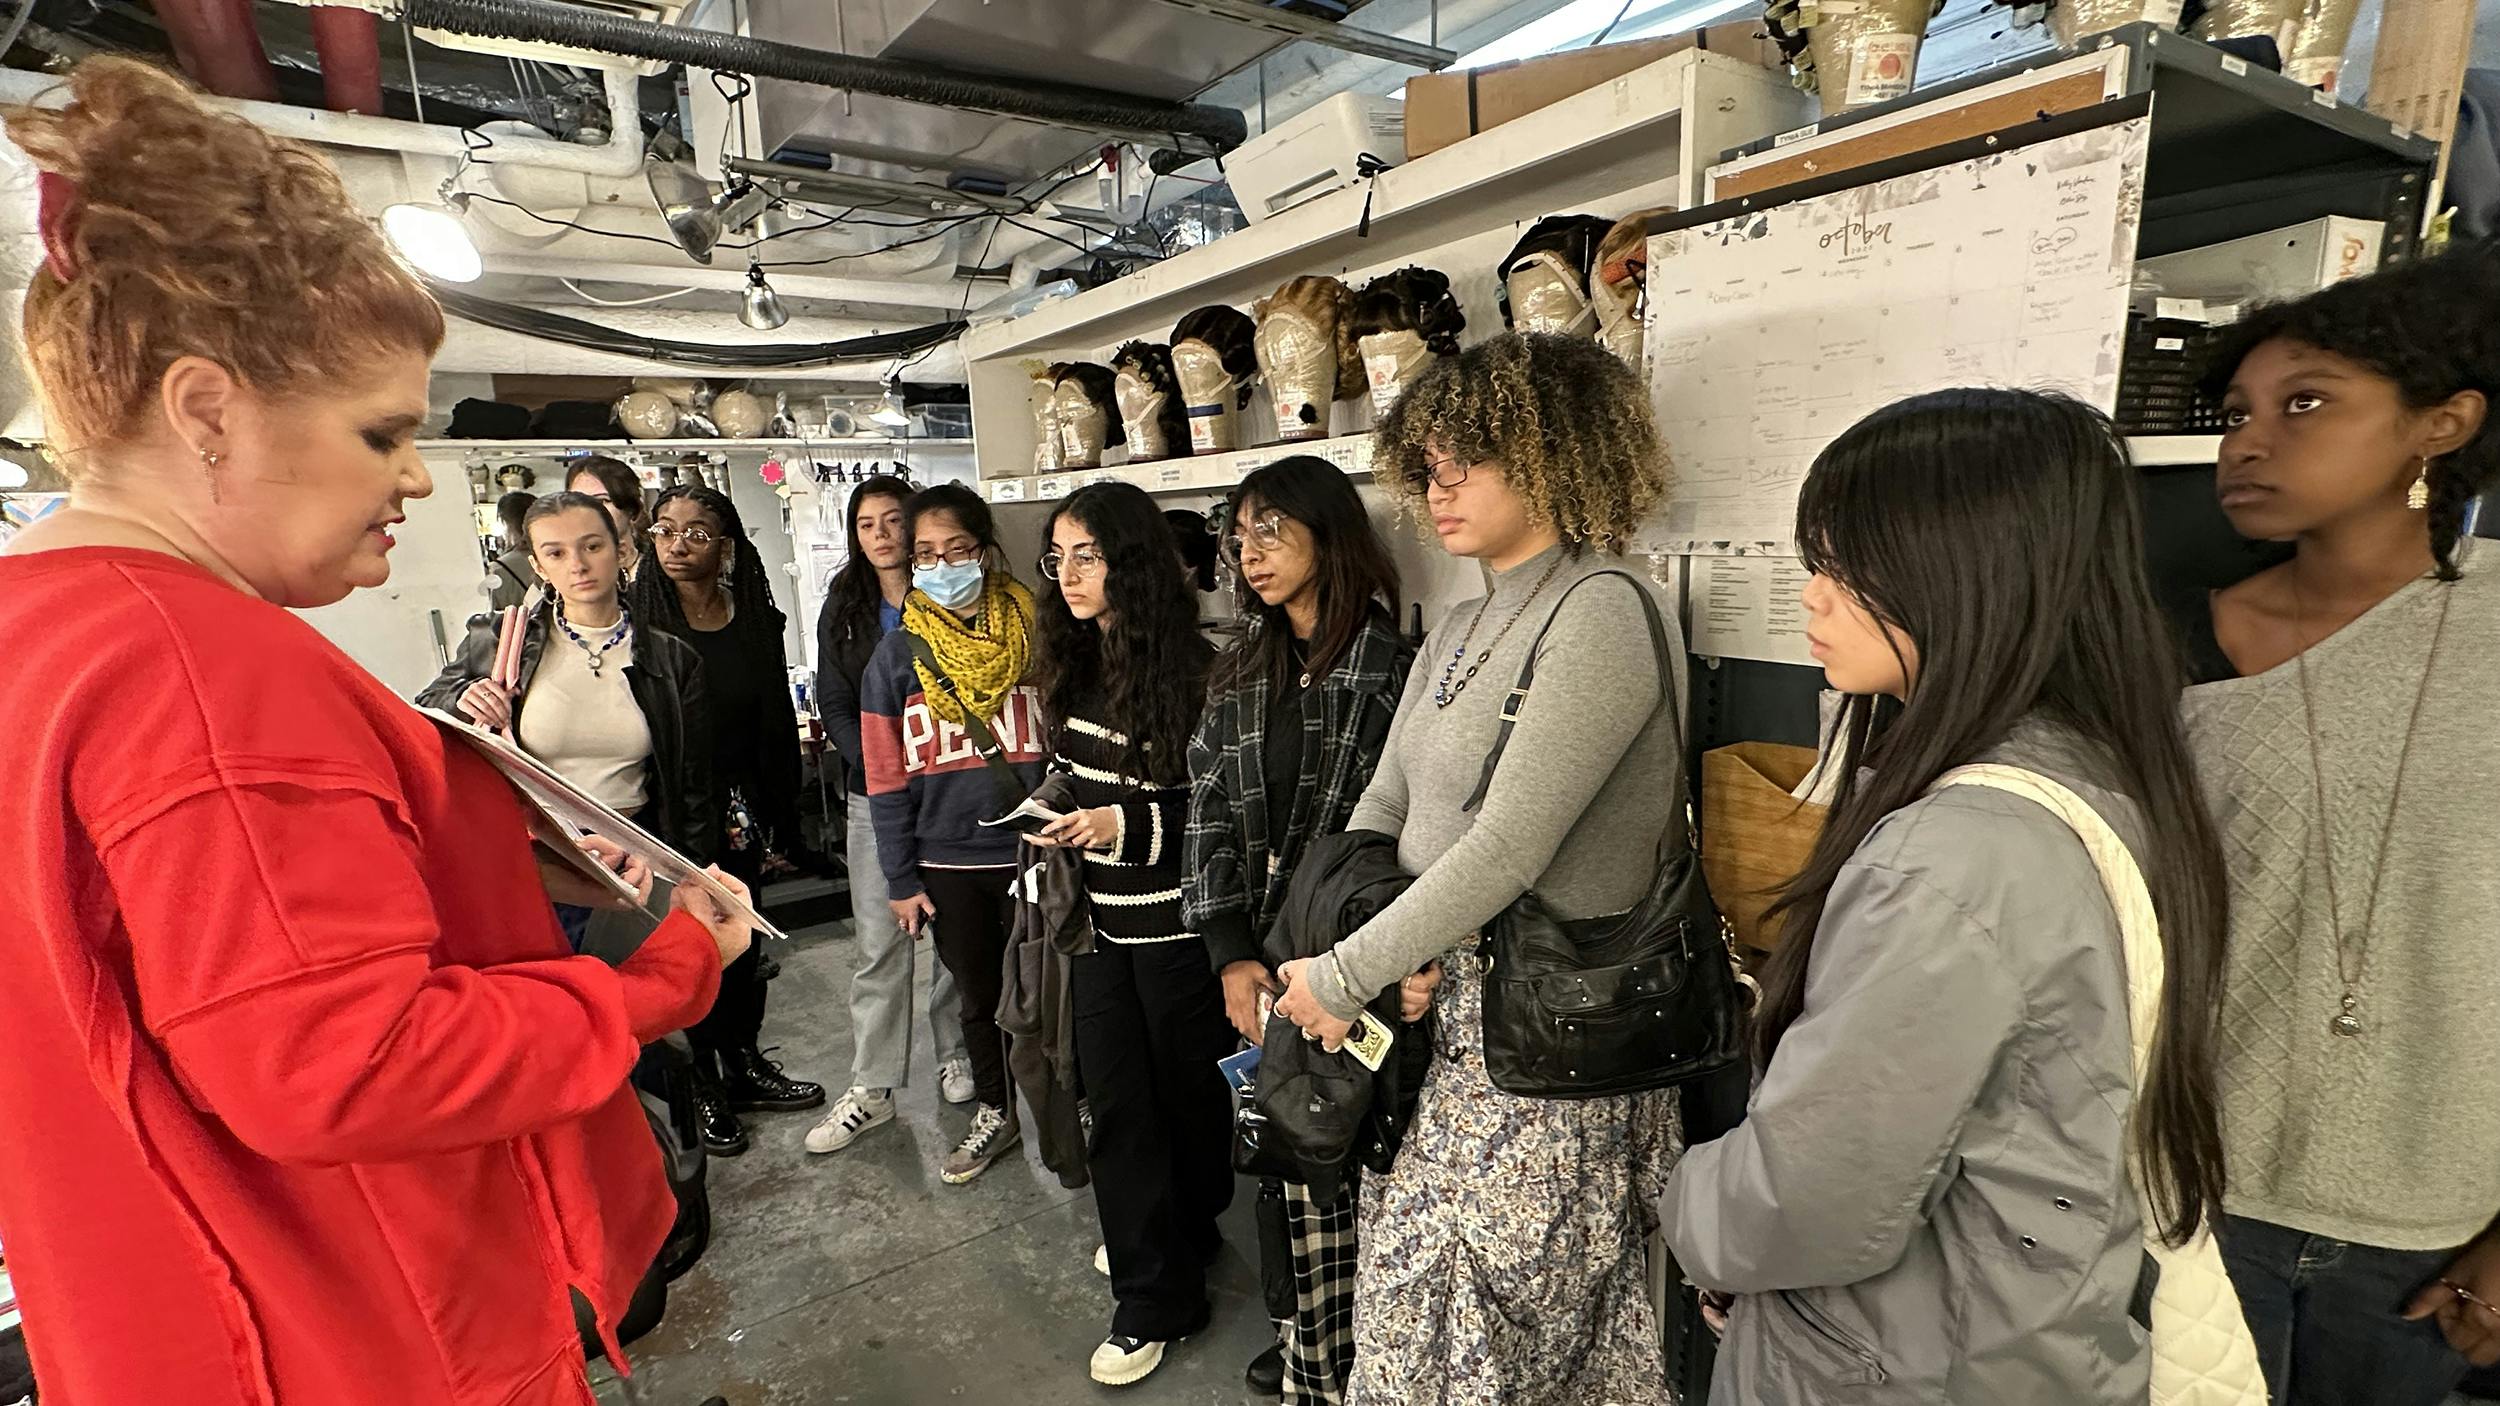 Students during a backstage tour of SO<E LIKE IT HOT on Broadway: a group of high school girls and non-binary students tour the Wig Room backstage at SOME LIKE IT HOT on Broadway.